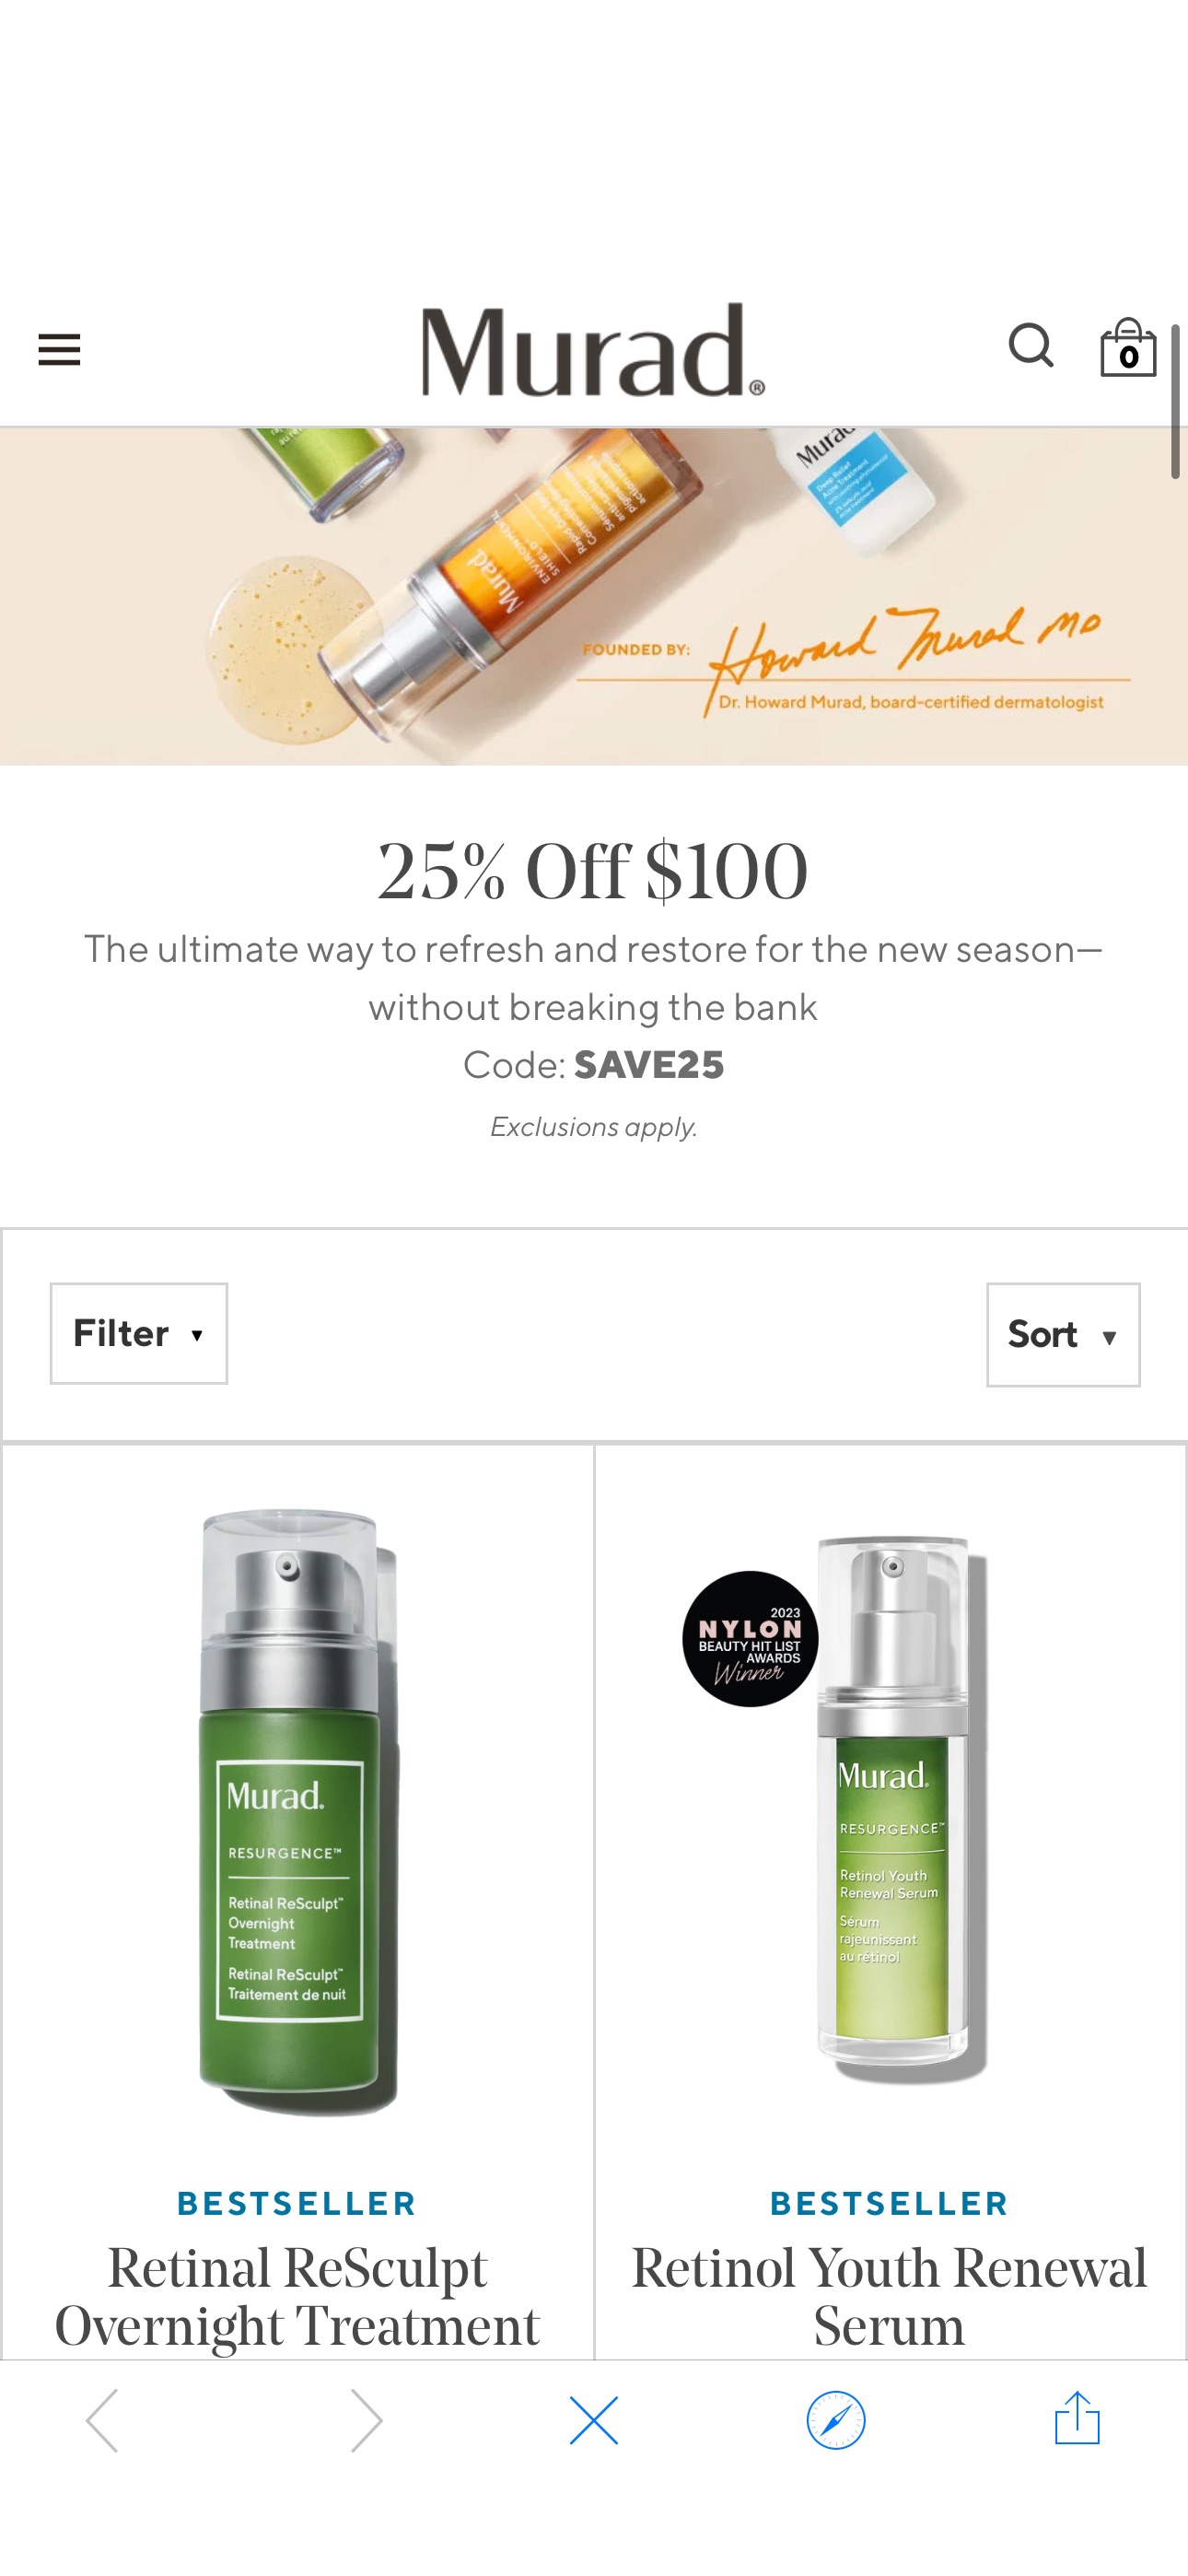 Shop Murad's Bestsellers | Murad Skincare 25% Off $100 The ultimate way to refresh and restore for the new season—without breaking the bank
Code: SAVE25